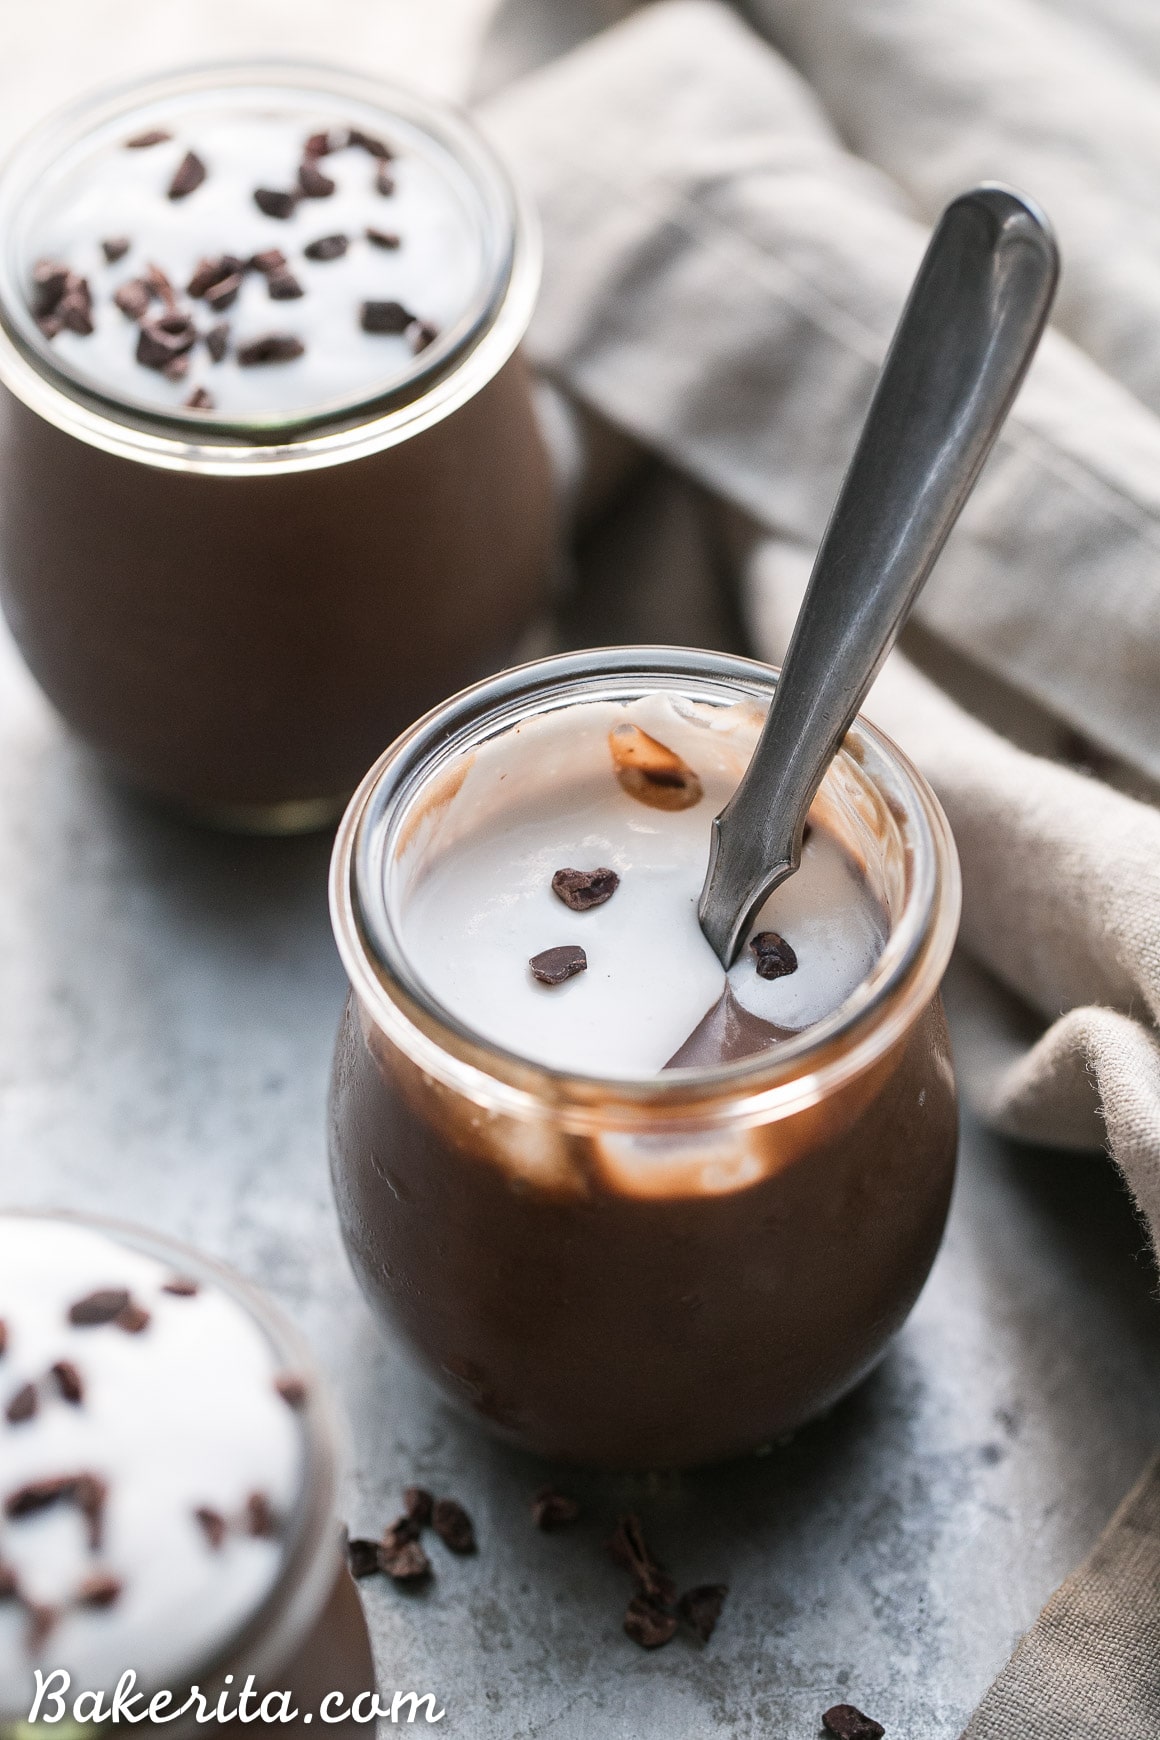 This Chocolate Pudding tastes just like the stuff from your childhood, except it's made much more guilt-free! This recipe is Paleo-friendly and vegan, and it's super easy to make.